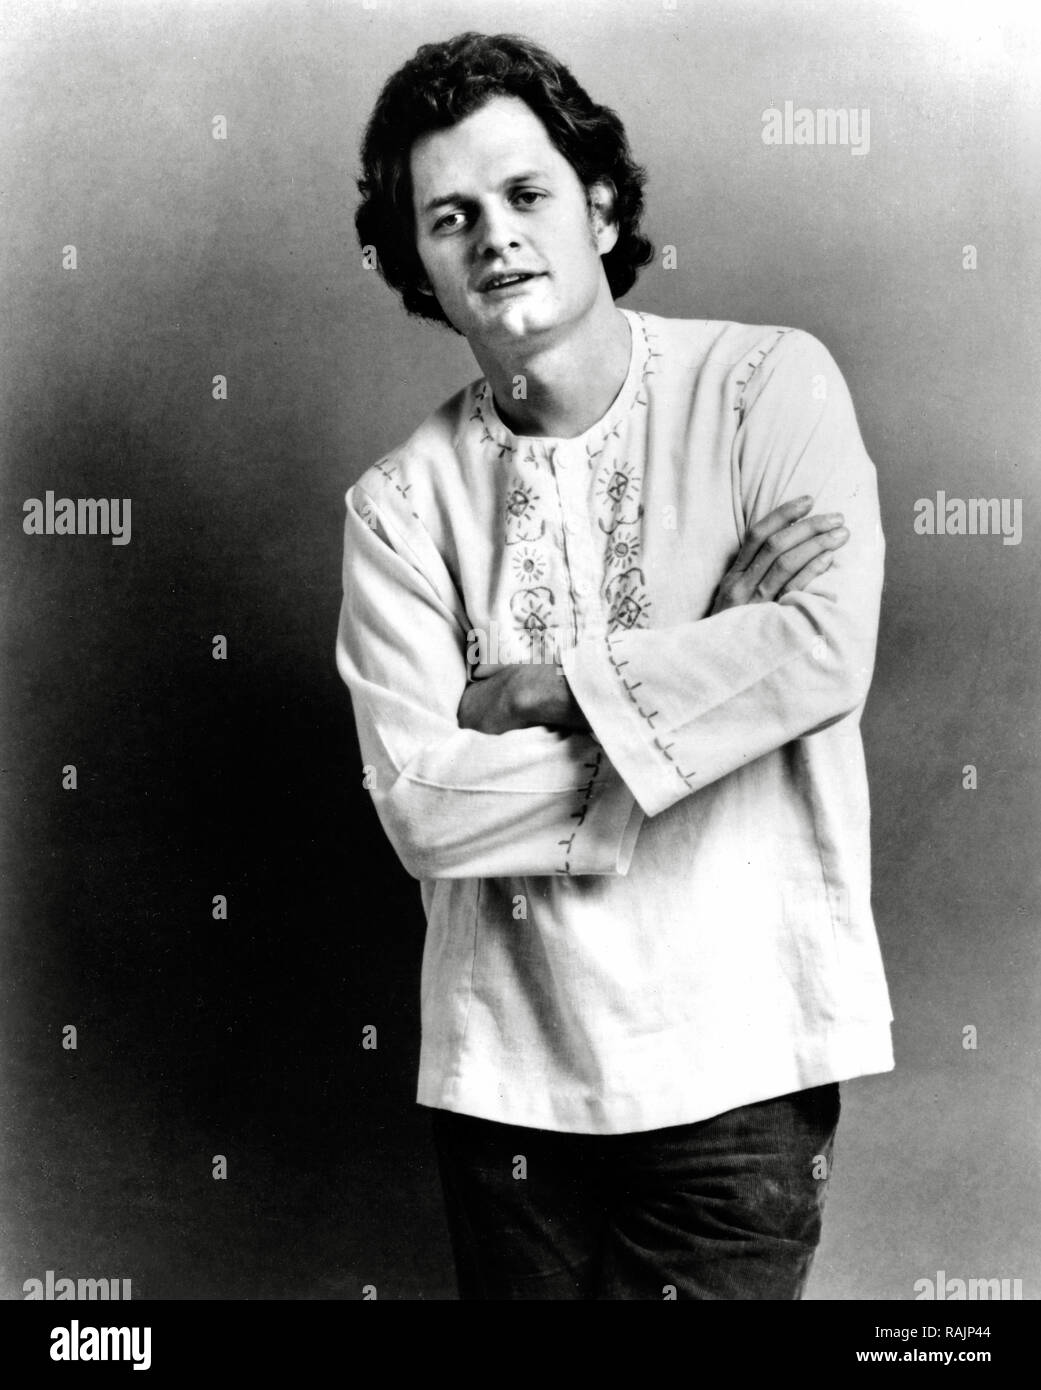 Publicity photo of Harry Chapin,  circa 1973    File Reference # 33636 975THA Stock Photo